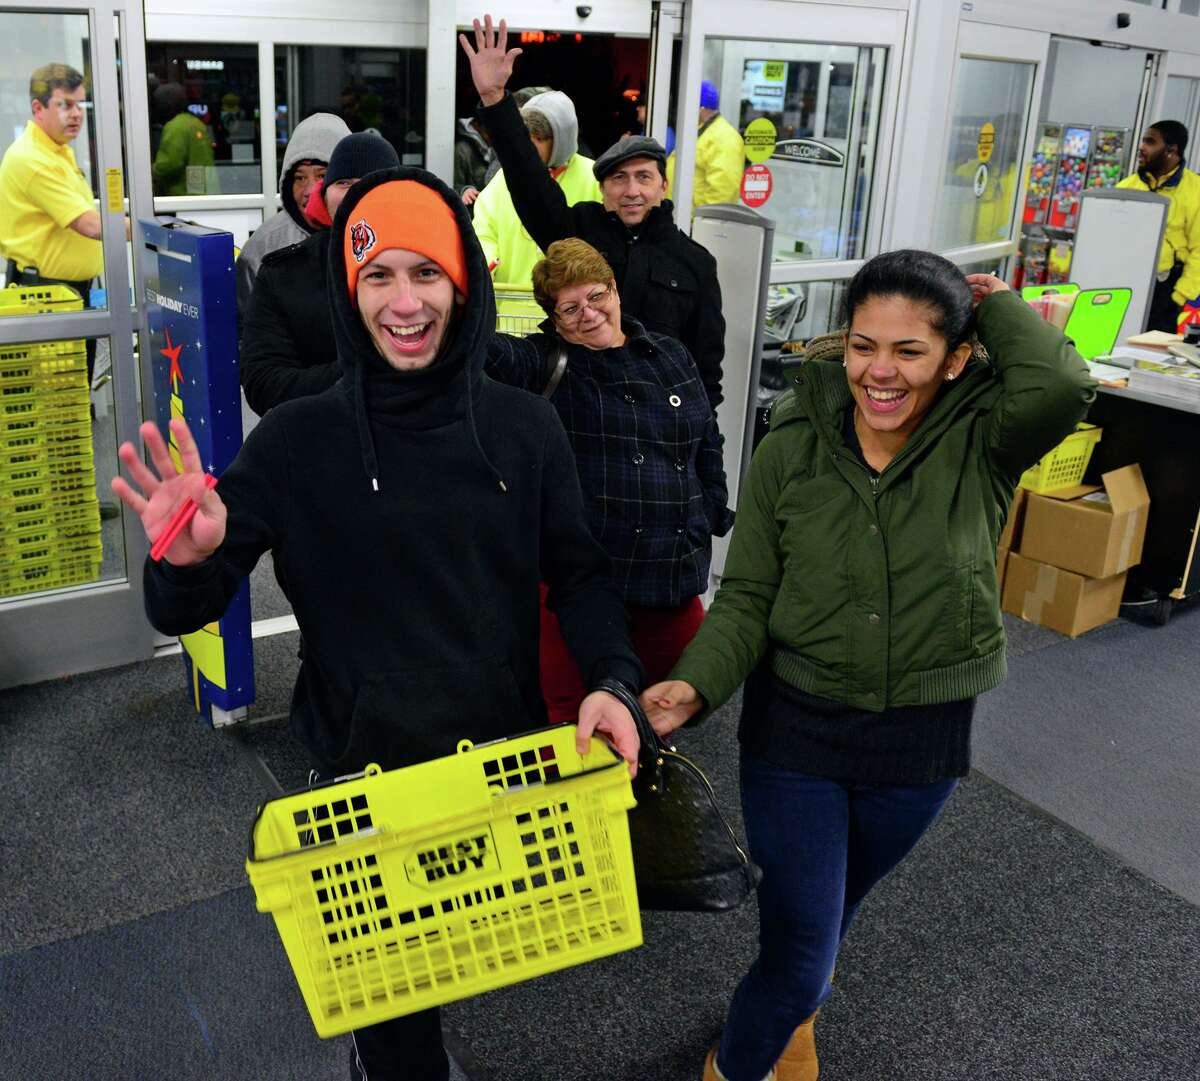 Holiday shoppers enter a Best Buy in Trumbull, Conn., on Thanksgiving day of 2014. The chain is among a large number nationally that will stay closed on Thanksgiving in 2021, with plans for early shopping hours on the morning of Black Friday.